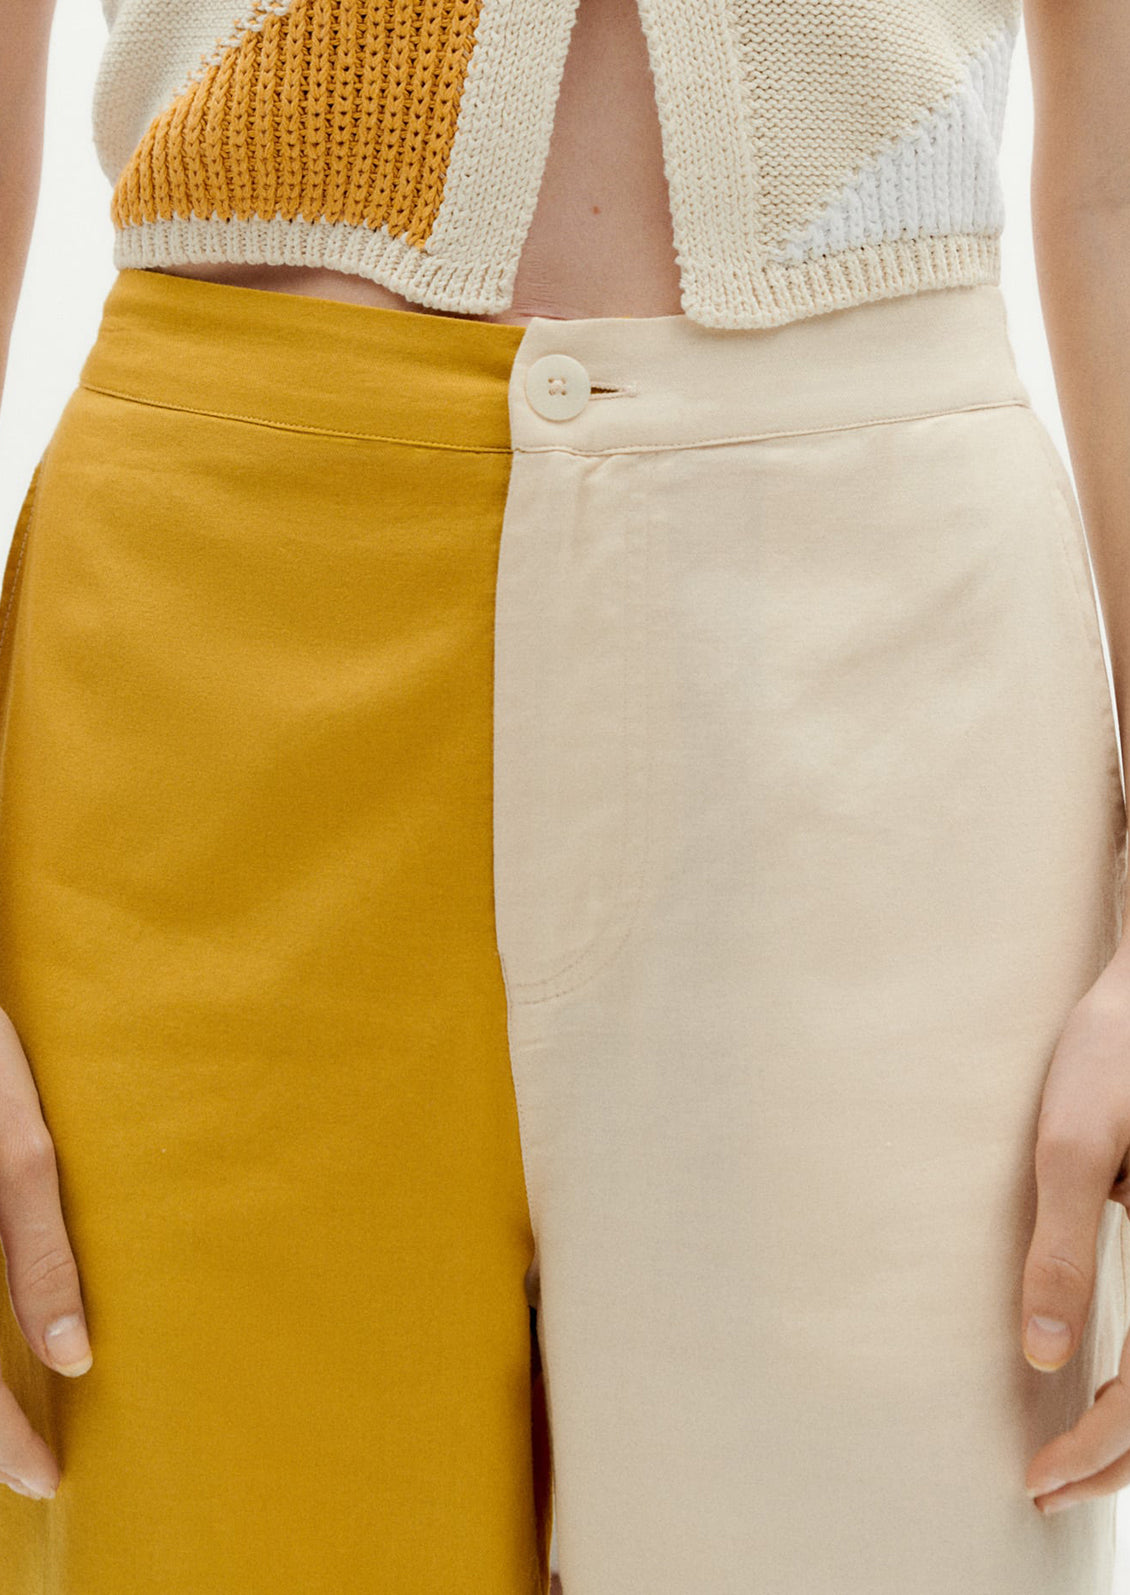 A pair of pants with one leg in yellow and one leg in cream.